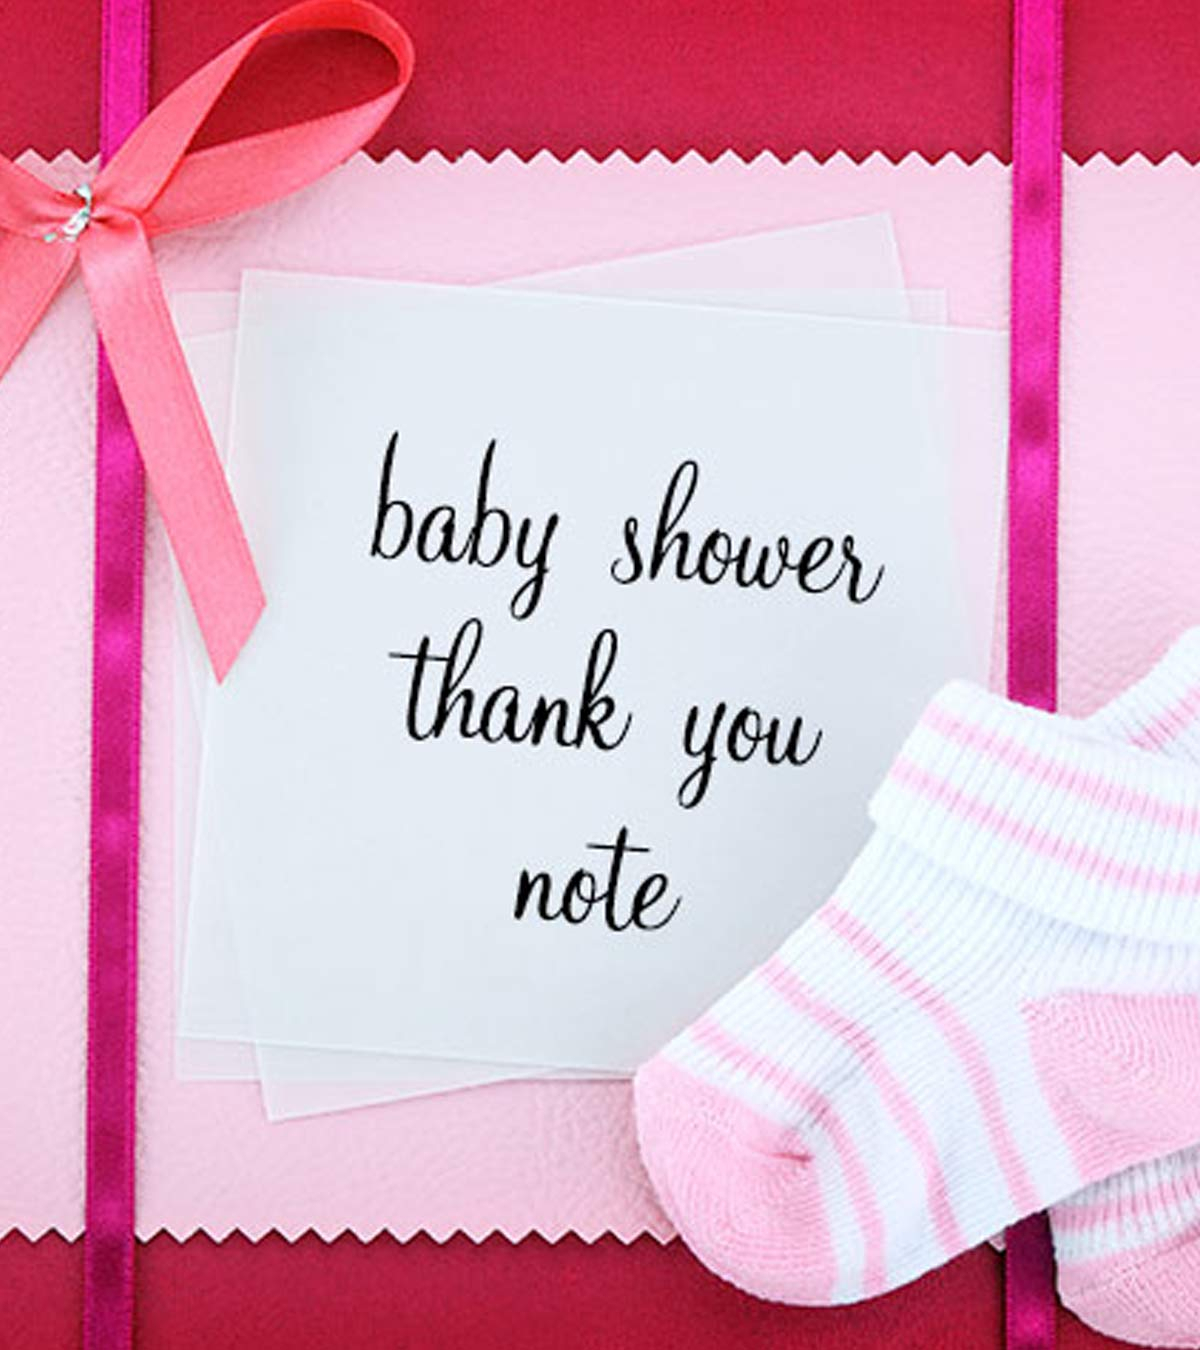 Baby Shower Thank You Notes: What To Write In A Thank You Card For Template For Baby Shower Thank You Cards